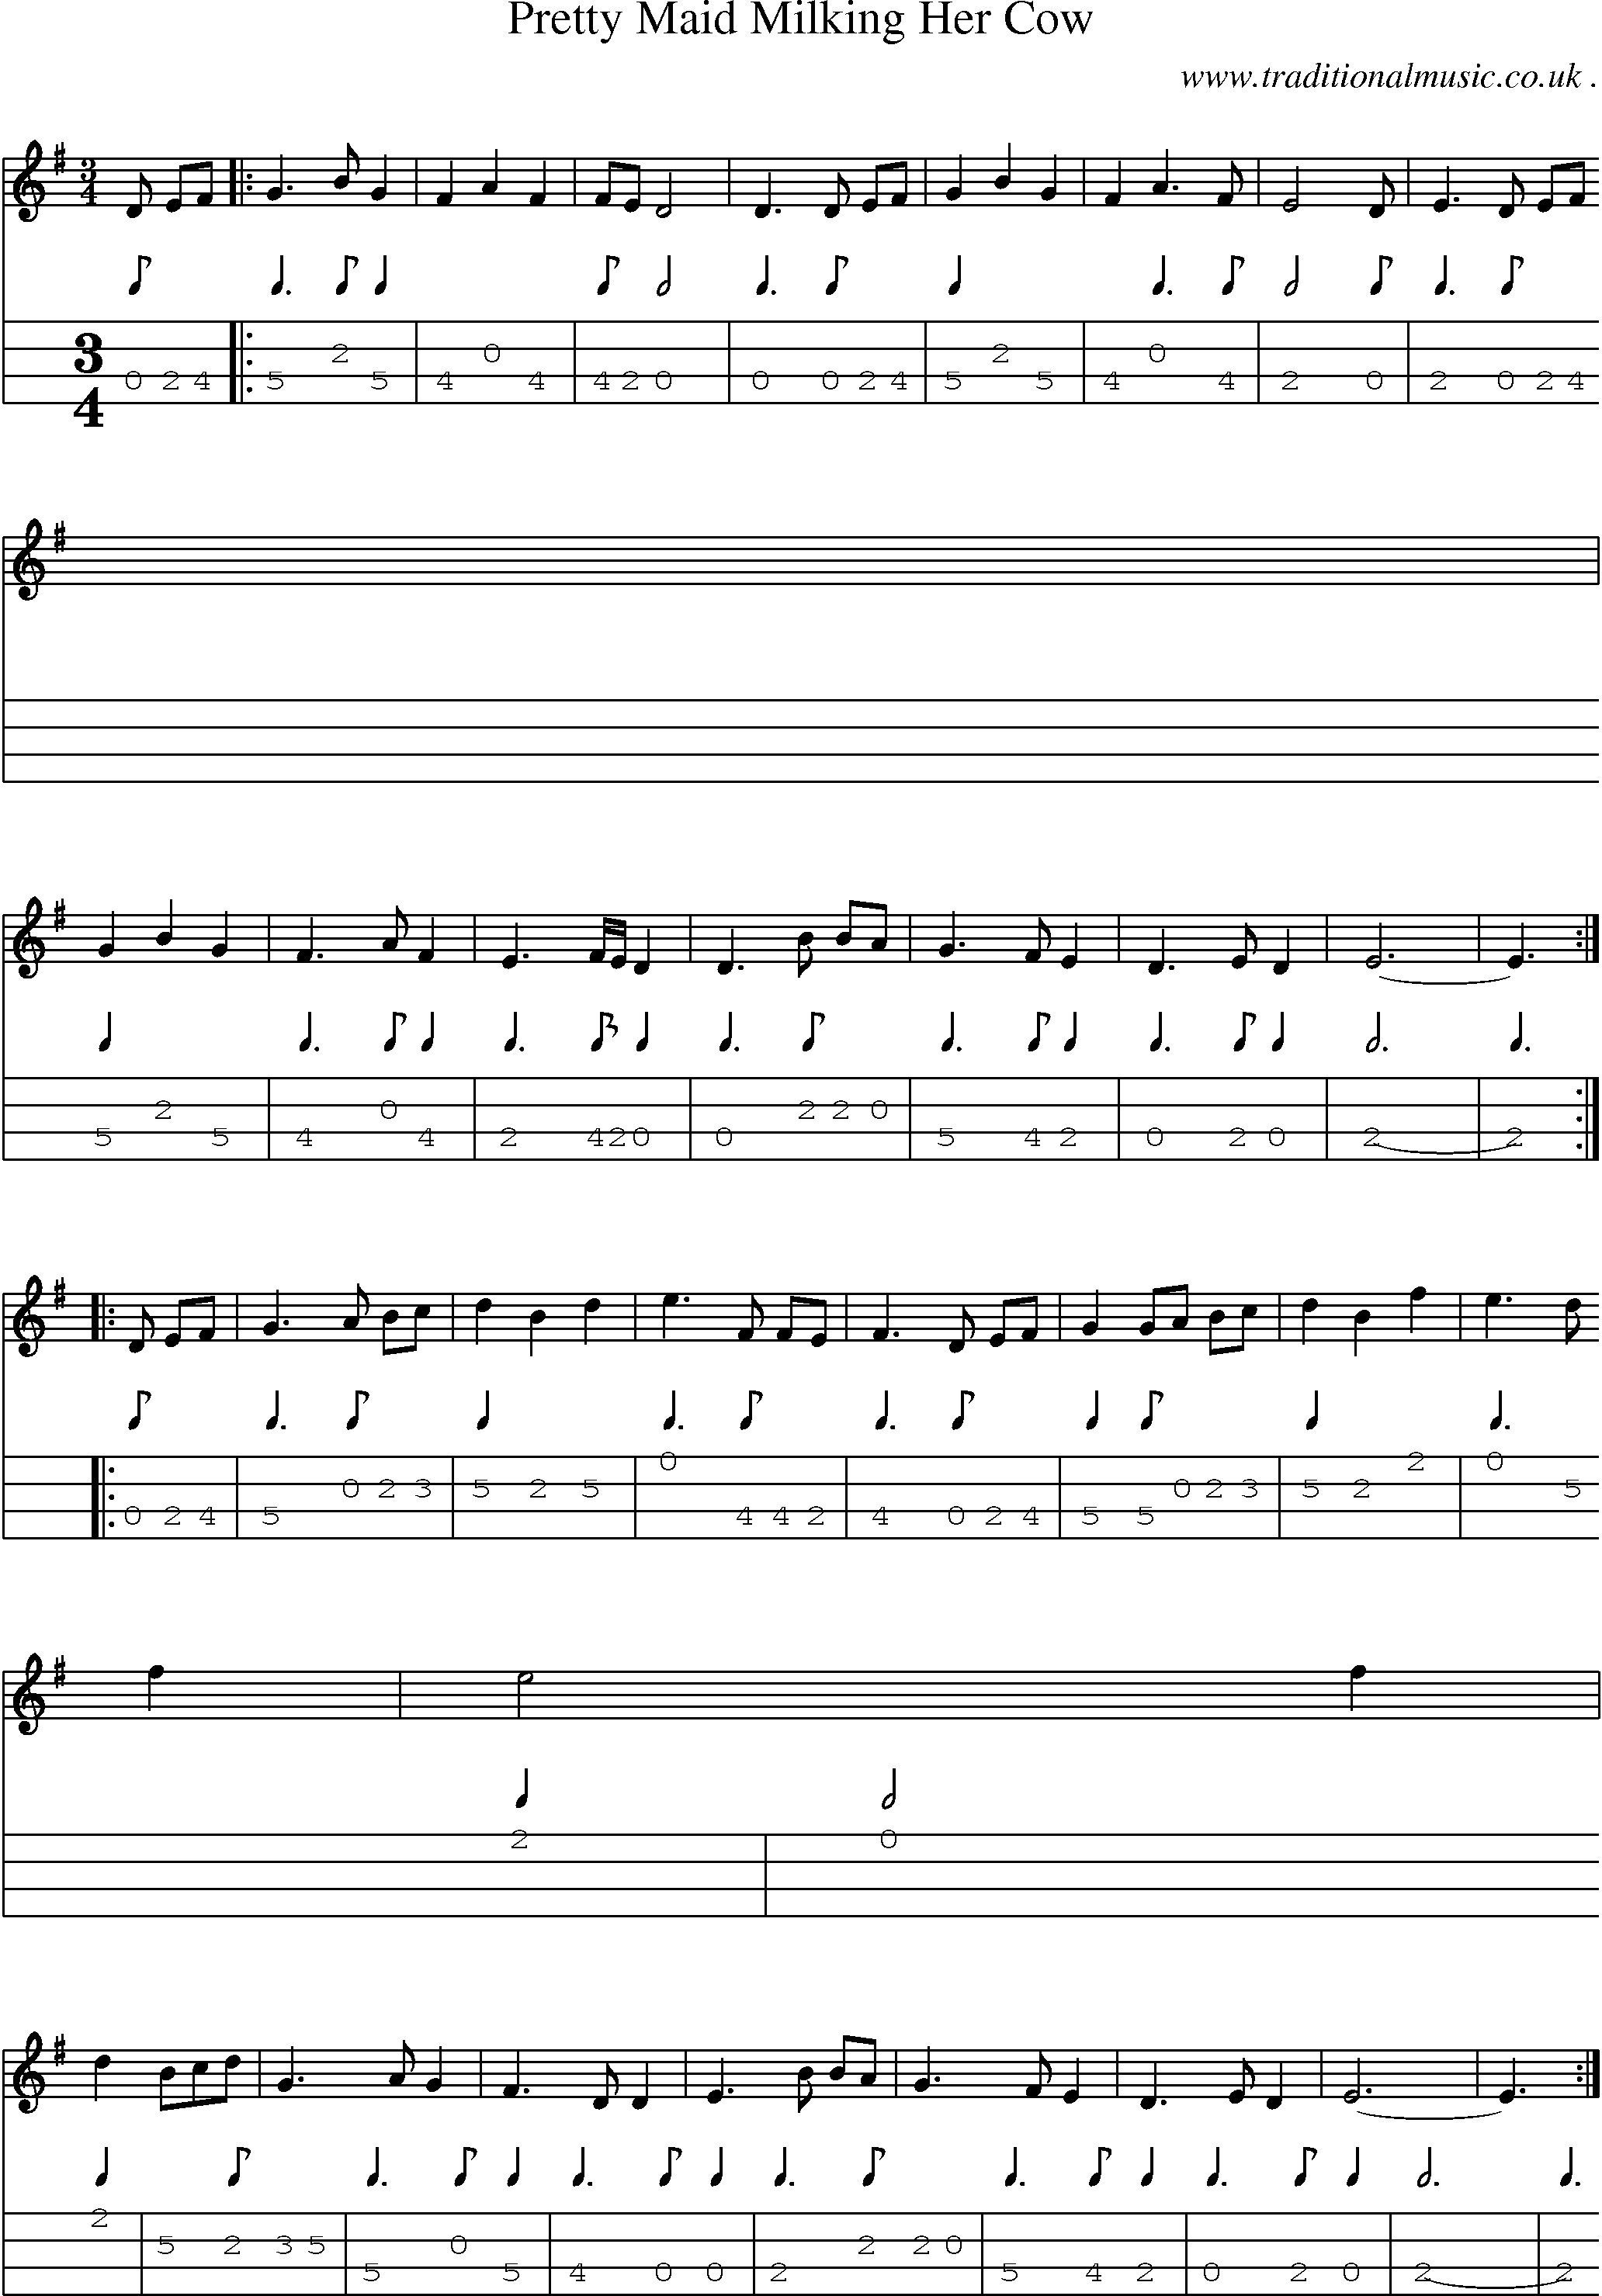 Sheet-music  score, Chords and Mandolin Tabs for Pretty Maid Milking Her Cow